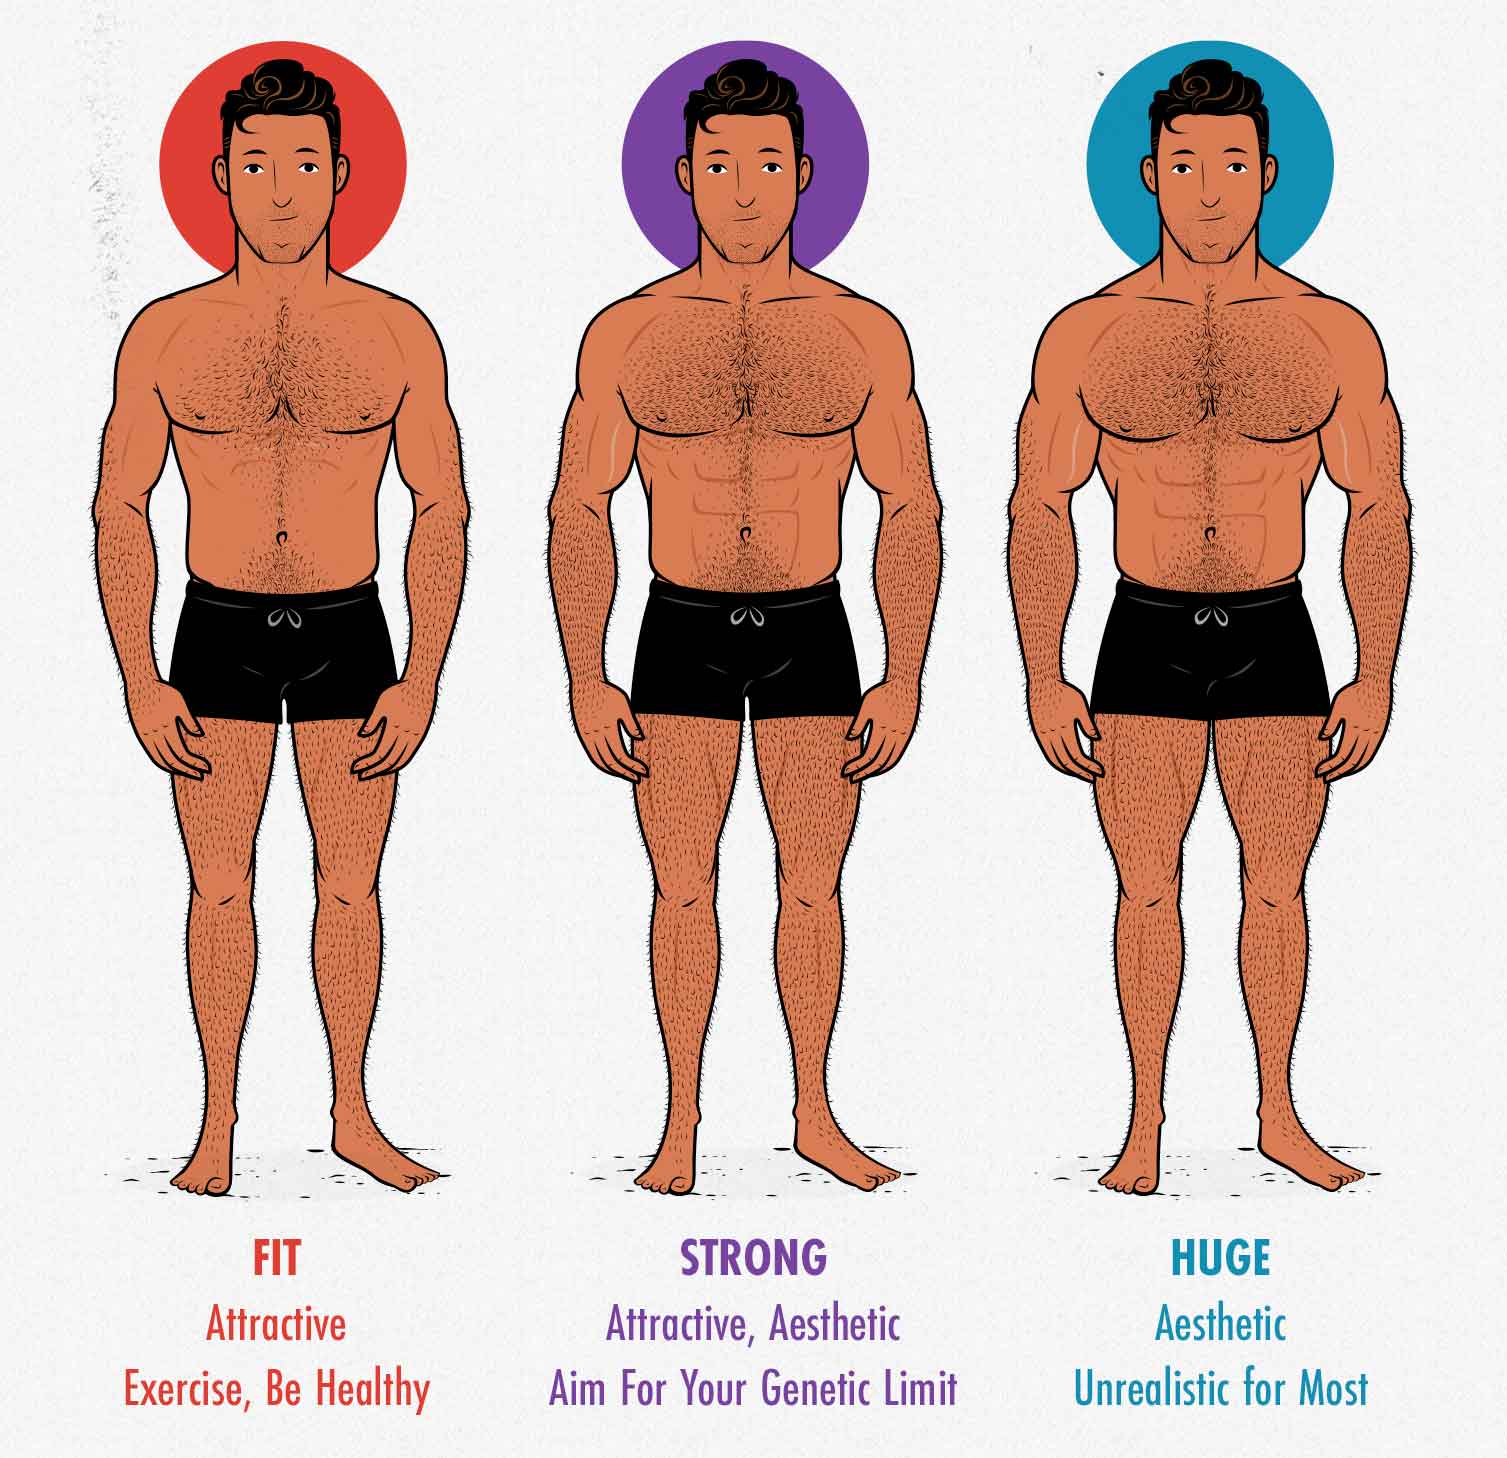 Diagram showing the differences between the most attractive and the most aesthetic male bodies.